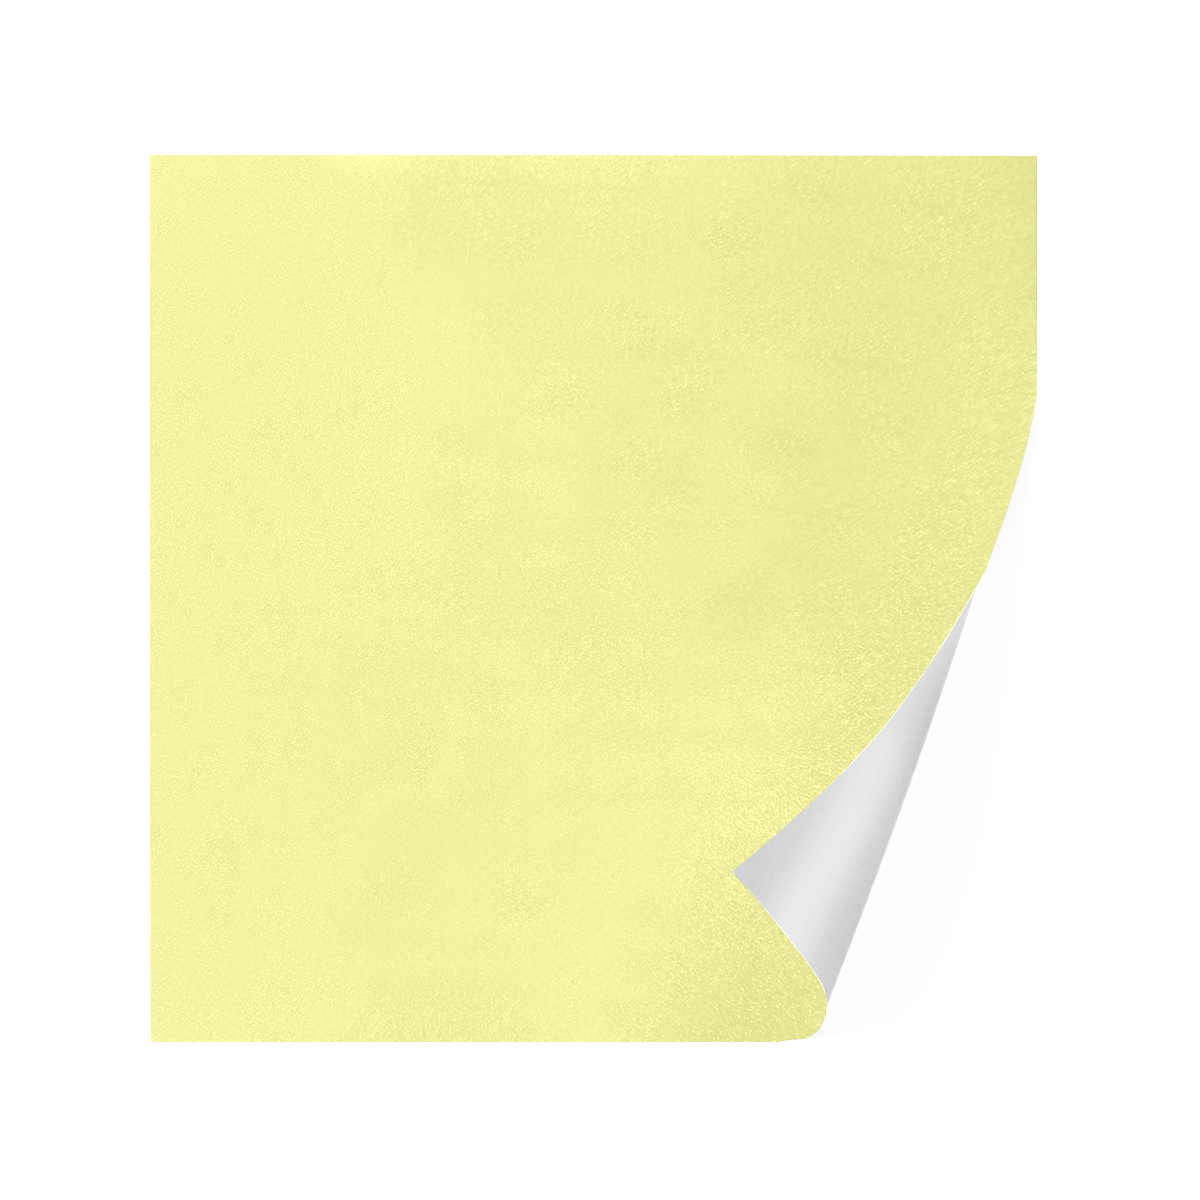 color canary yellow Gift Wrapping Paper 58"x 23" (1 Roll)